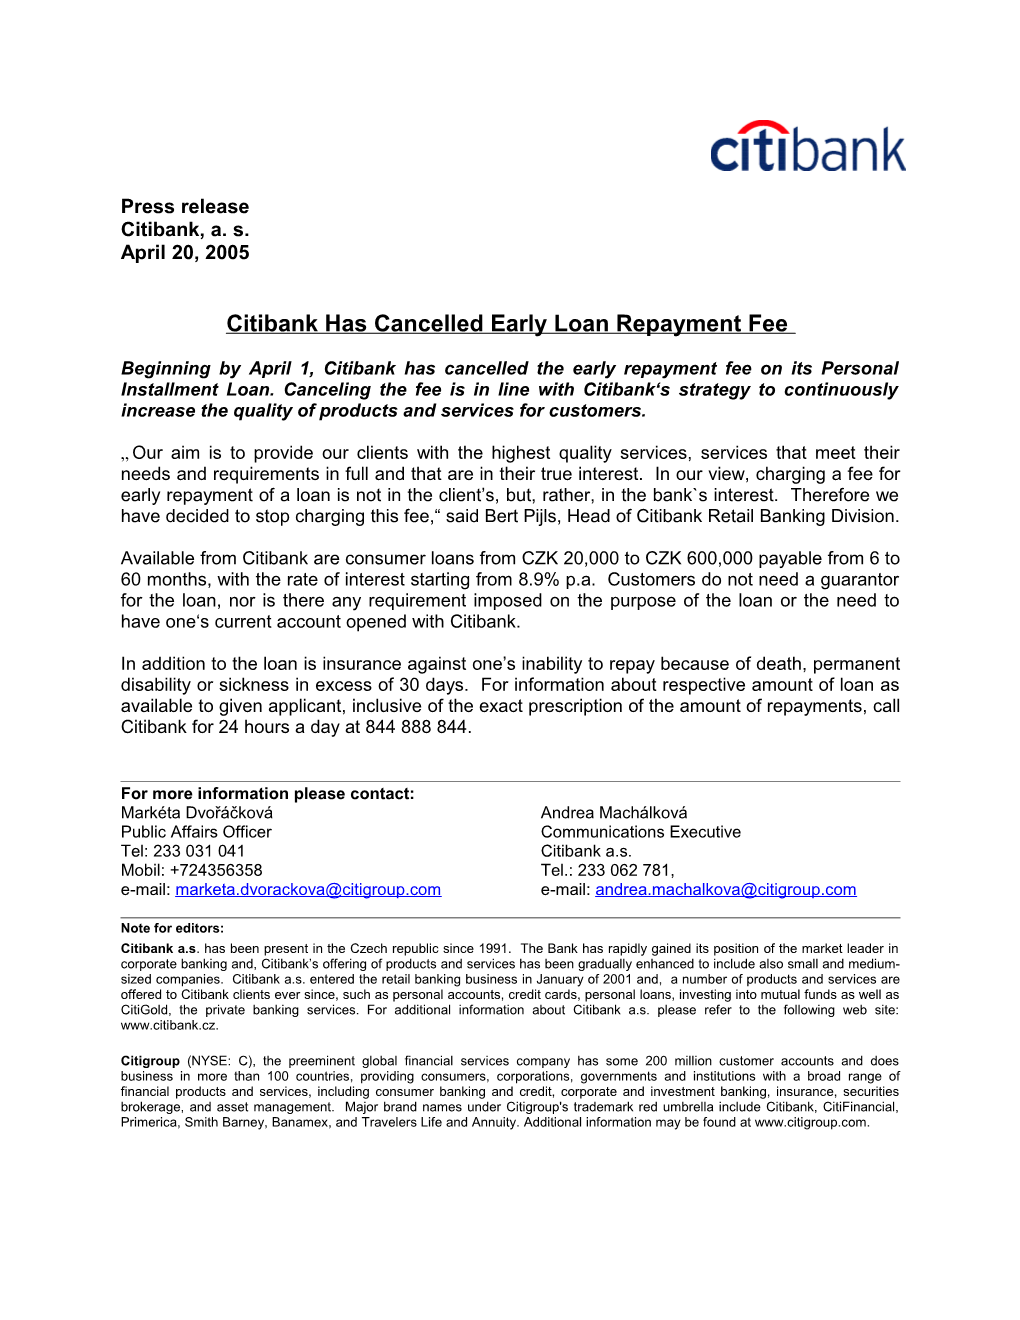 Citibank Has Cancelled Early Loan Repayment Fee